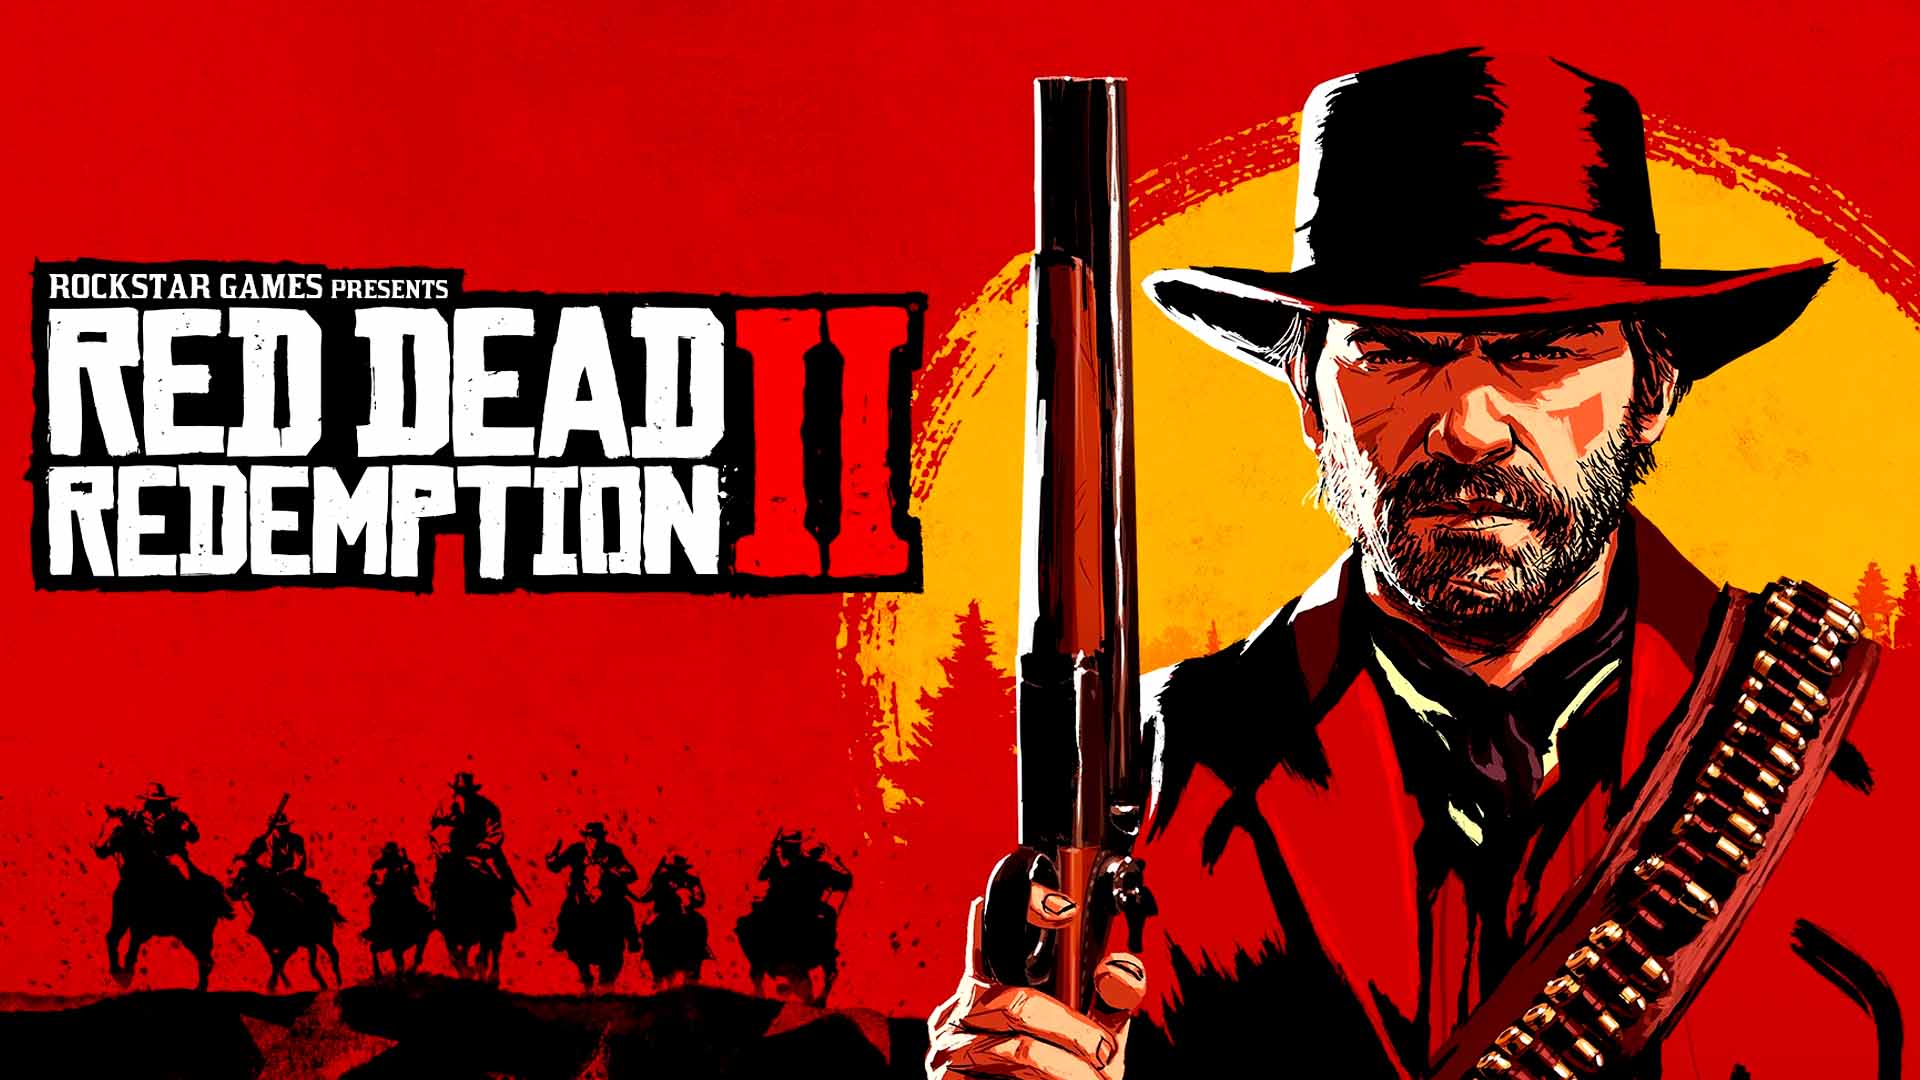 Red Dead Redemption 2 iOS/APK Full Version Free Download